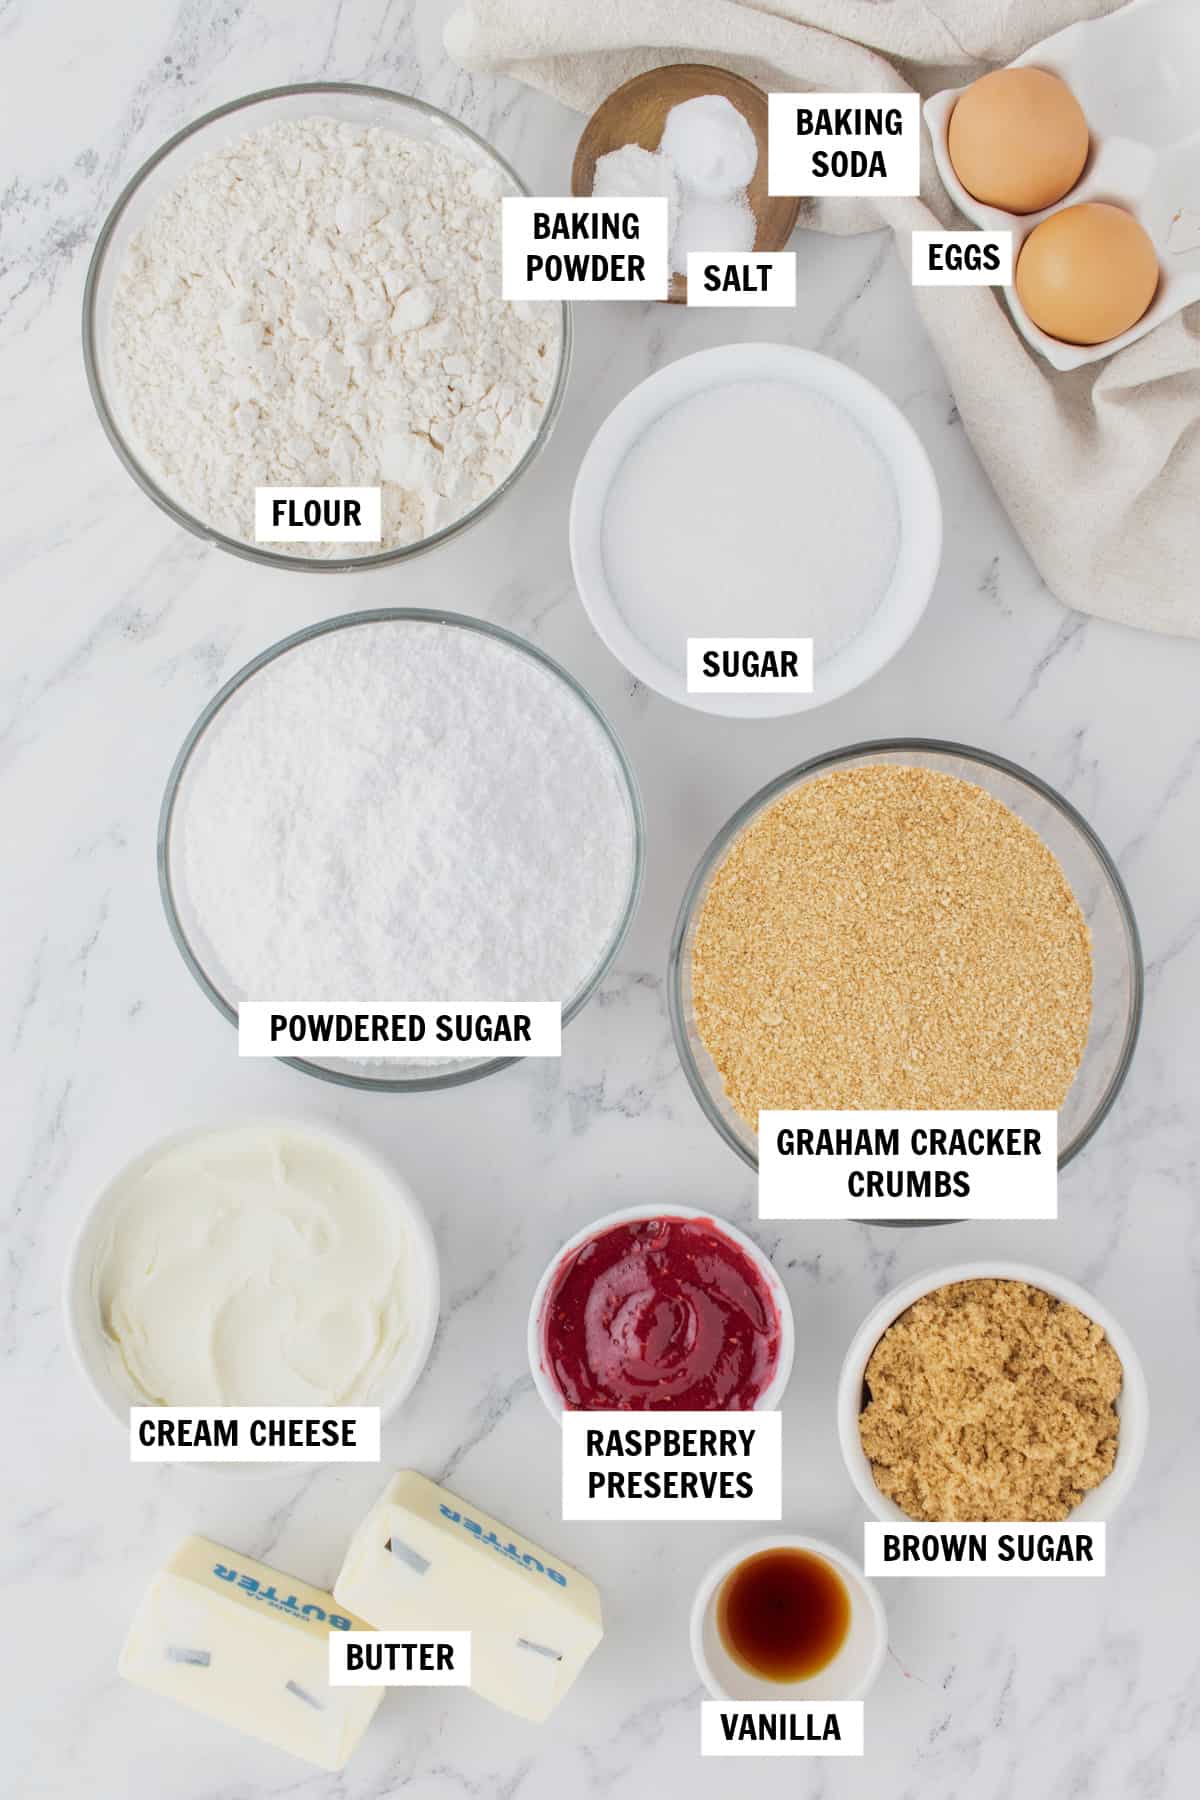 All of the ingredients you need for Raspberry Cheesecake Cookies sitting on a white countertop including butter, sugar, eggs, vanilla, flour, graham cracker crumbs, salt, baking powder, baking soda, cream cheese and raspberry preserves.